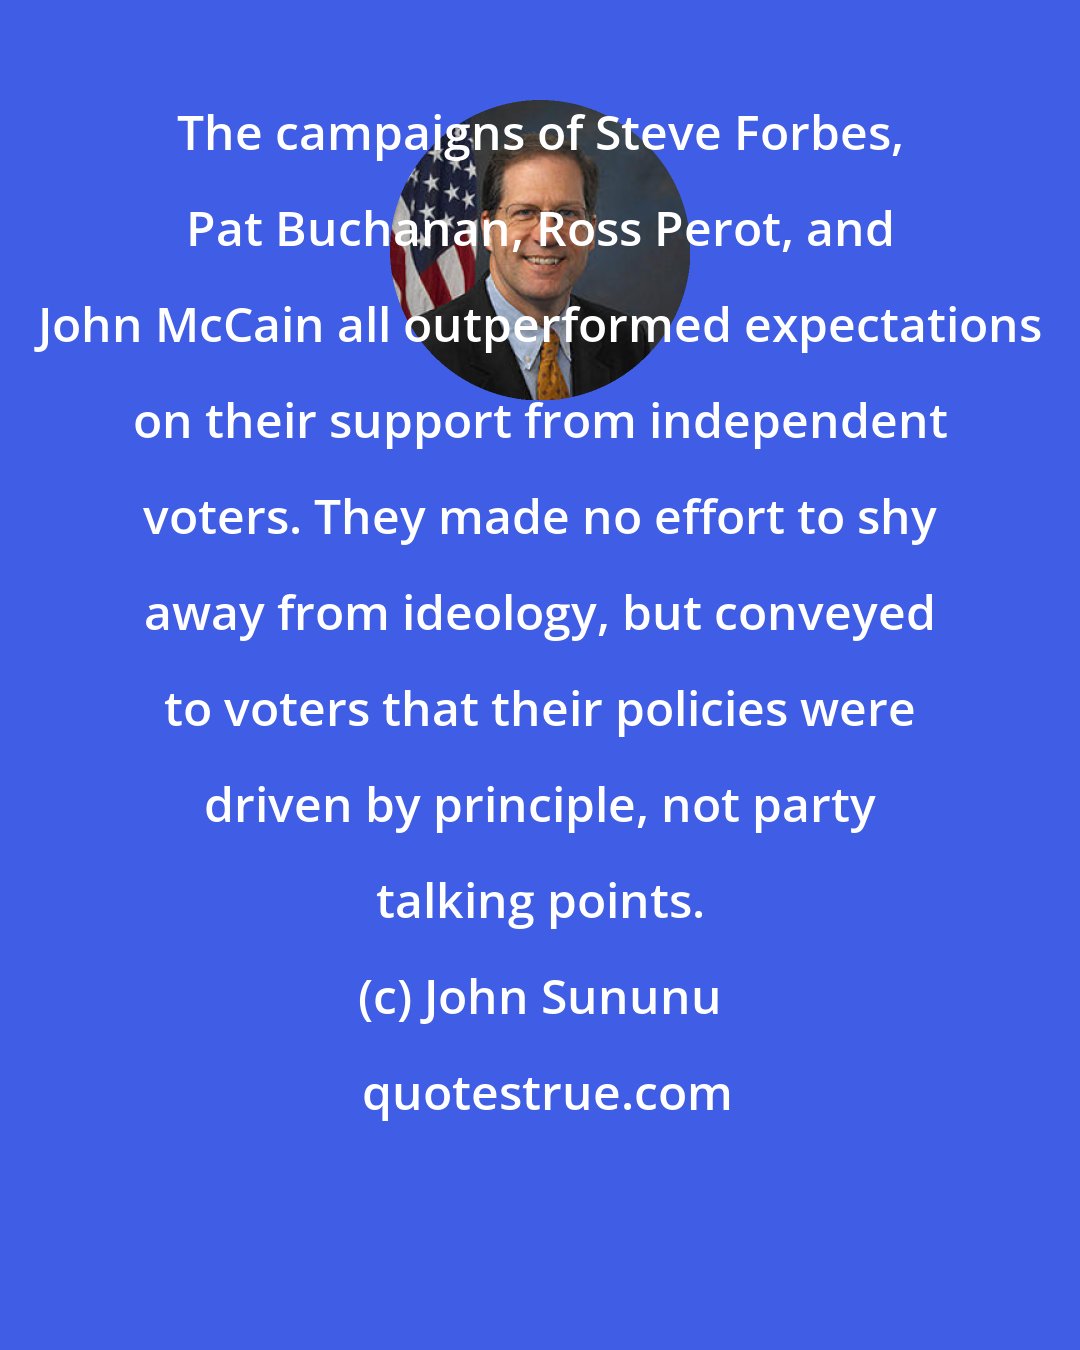 John Sununu: The campaigns of Steve Forbes, Pat Buchanan, Ross Perot, and John McCain all outperformed expectations on their support from independent voters. They made no effort to shy away from ideology, but conveyed to voters that their policies were driven by principle, not party talking points.